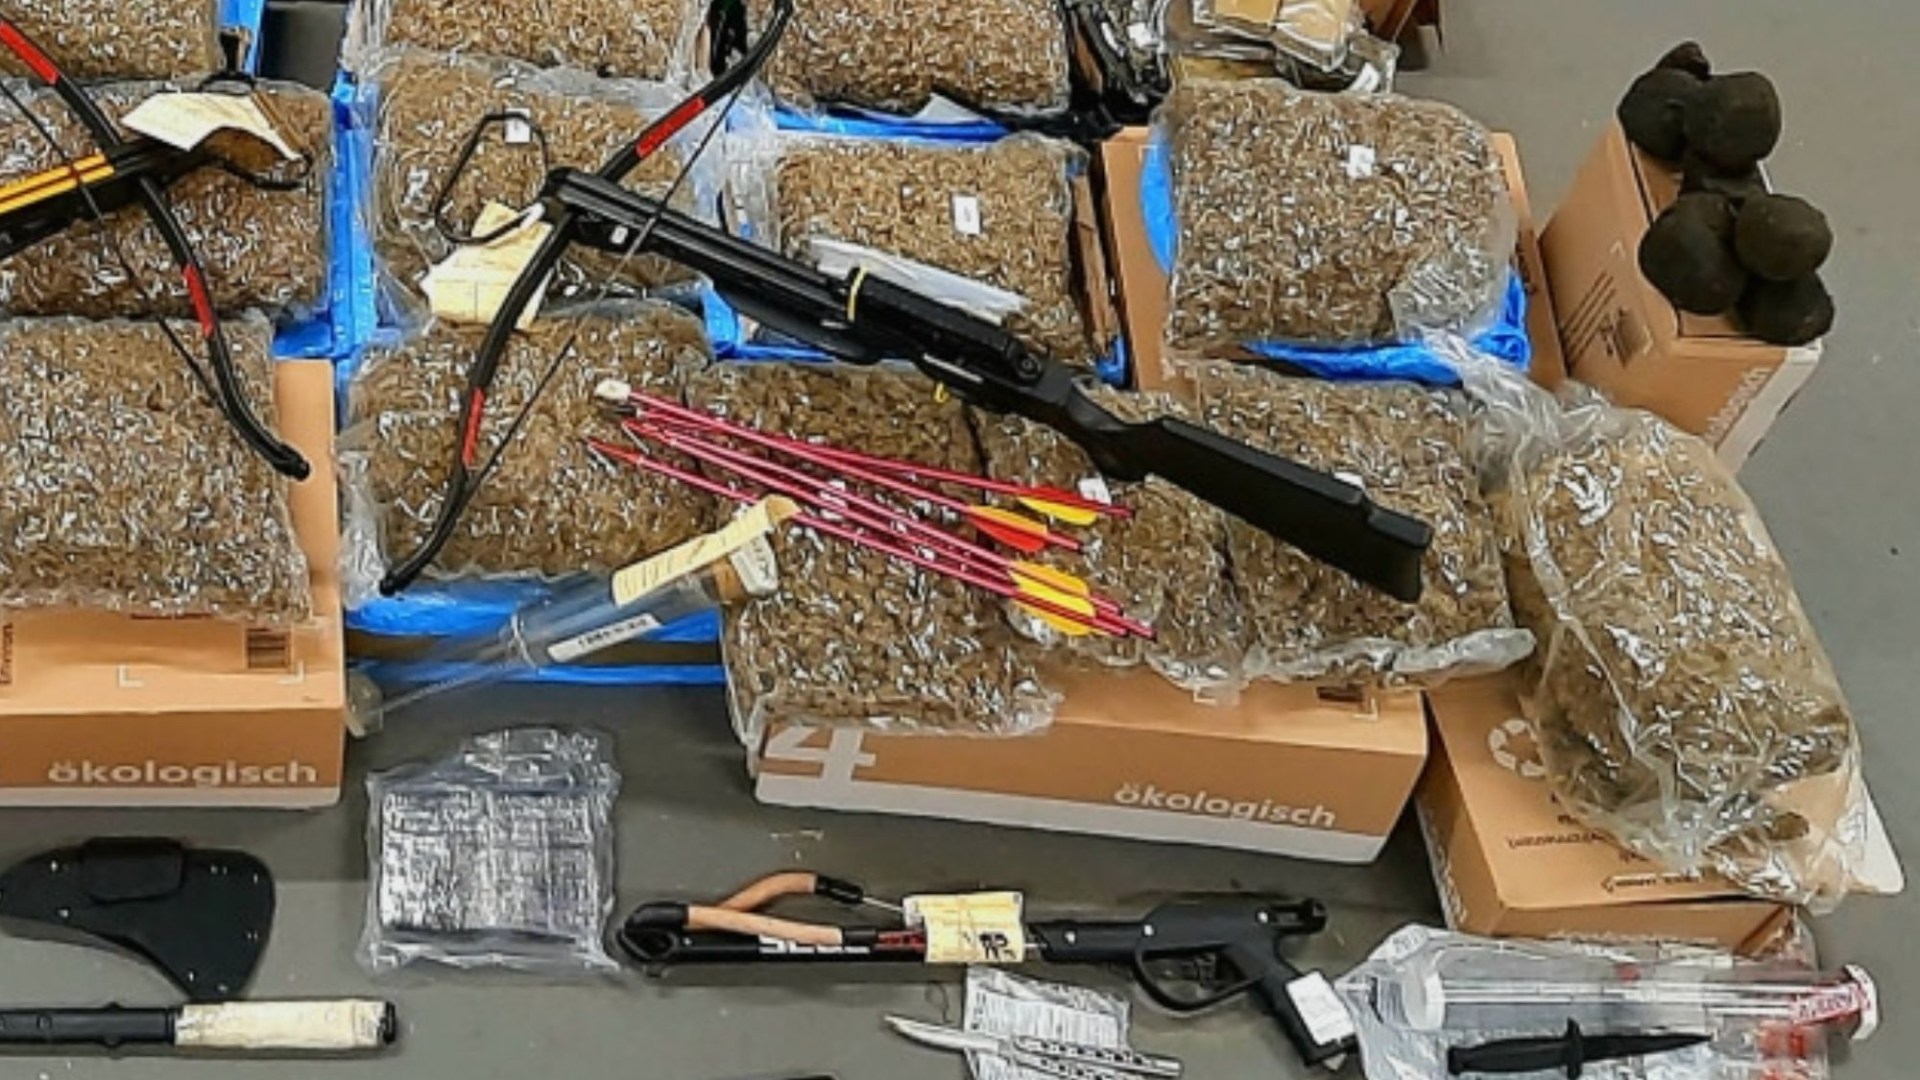 The UK city becoming a ‘cocaine gateway’ as cartels flood ports with Class A drugs and dealers arm kids with CROSSBOWS [Video]